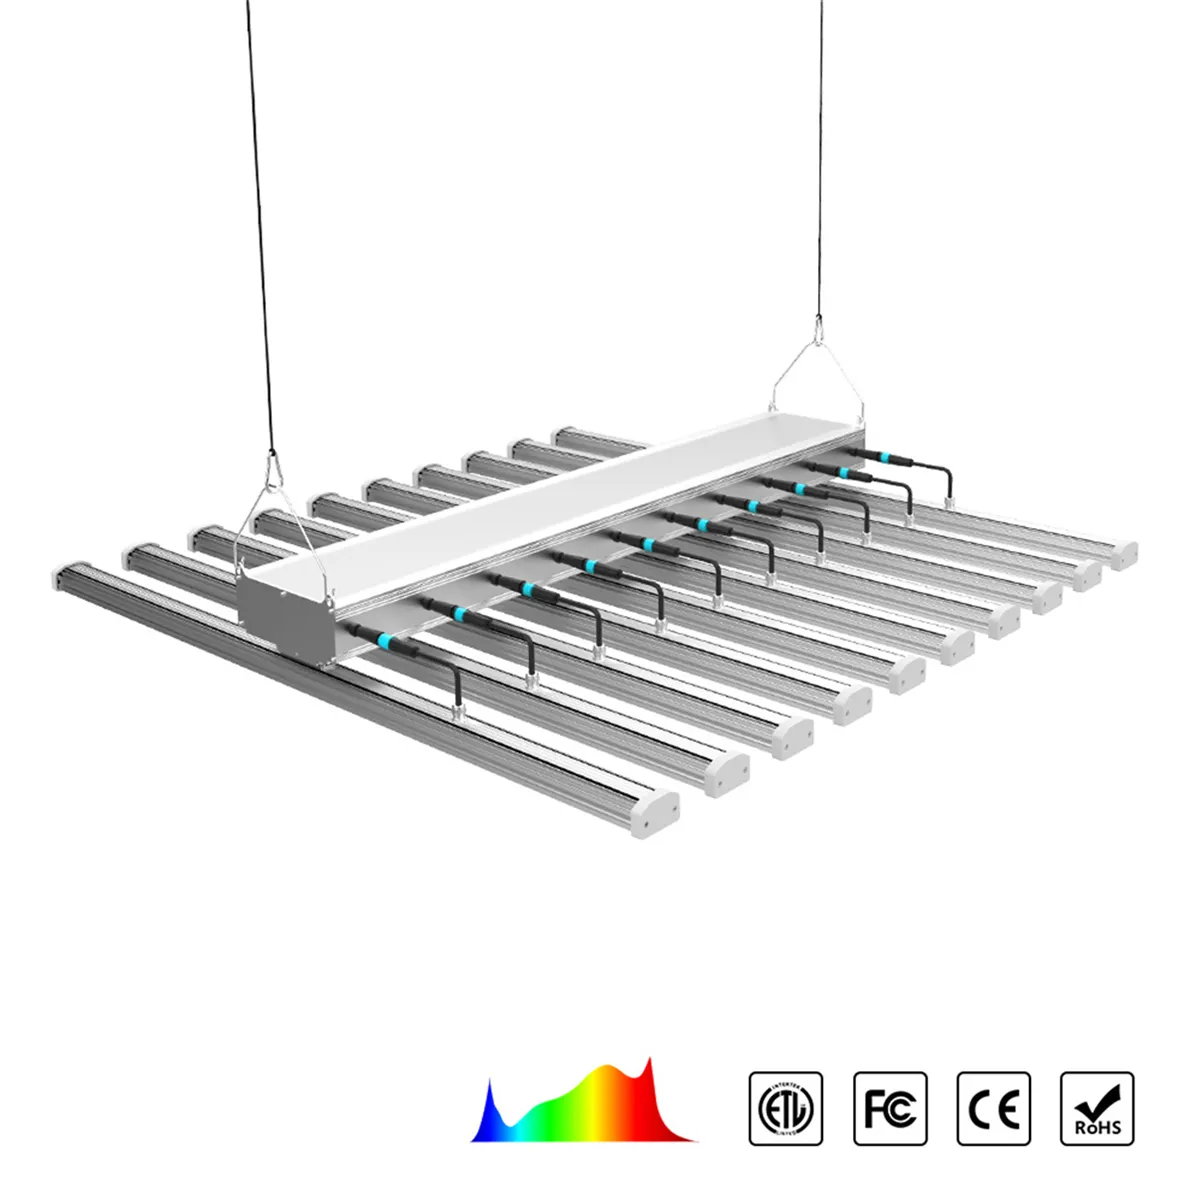 640w 8bars Yields up to 3 75 Lbs LED grow light Model E use281b diodes offer high efficacy and harvest245W